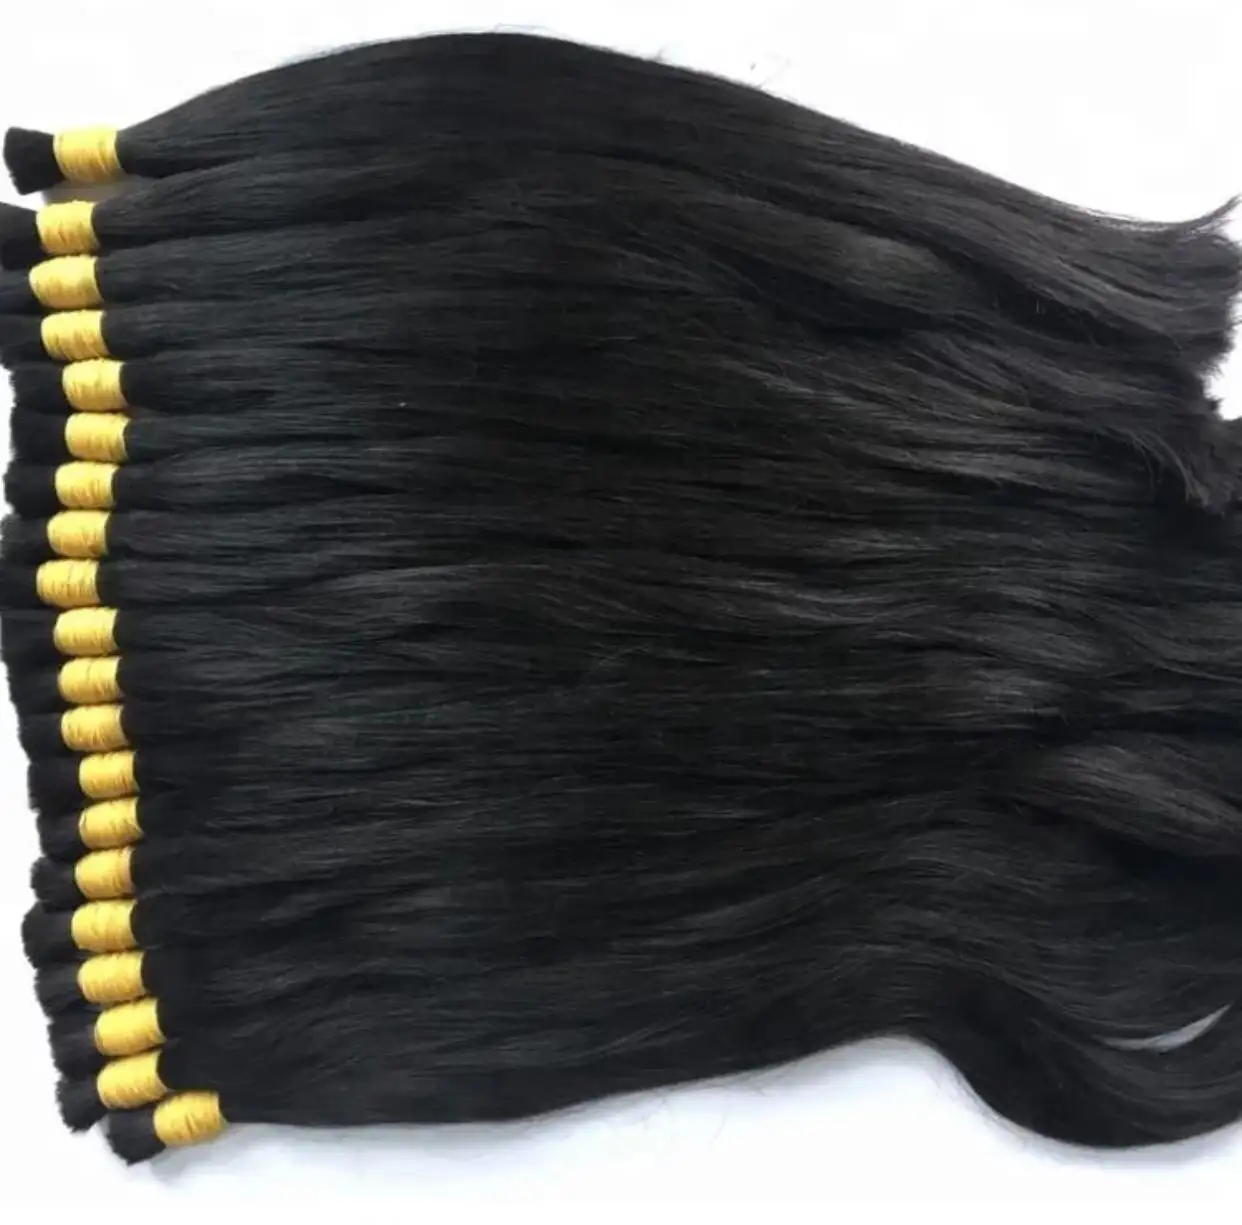 CHRISTMAS DEALS DEEP WAVE HALO HAIR HAND TIED INDIAN HUMAN HAIR EXTENSIONS UNPROCESSED HAIR BUNDLE AT SPECIAL OFFERS